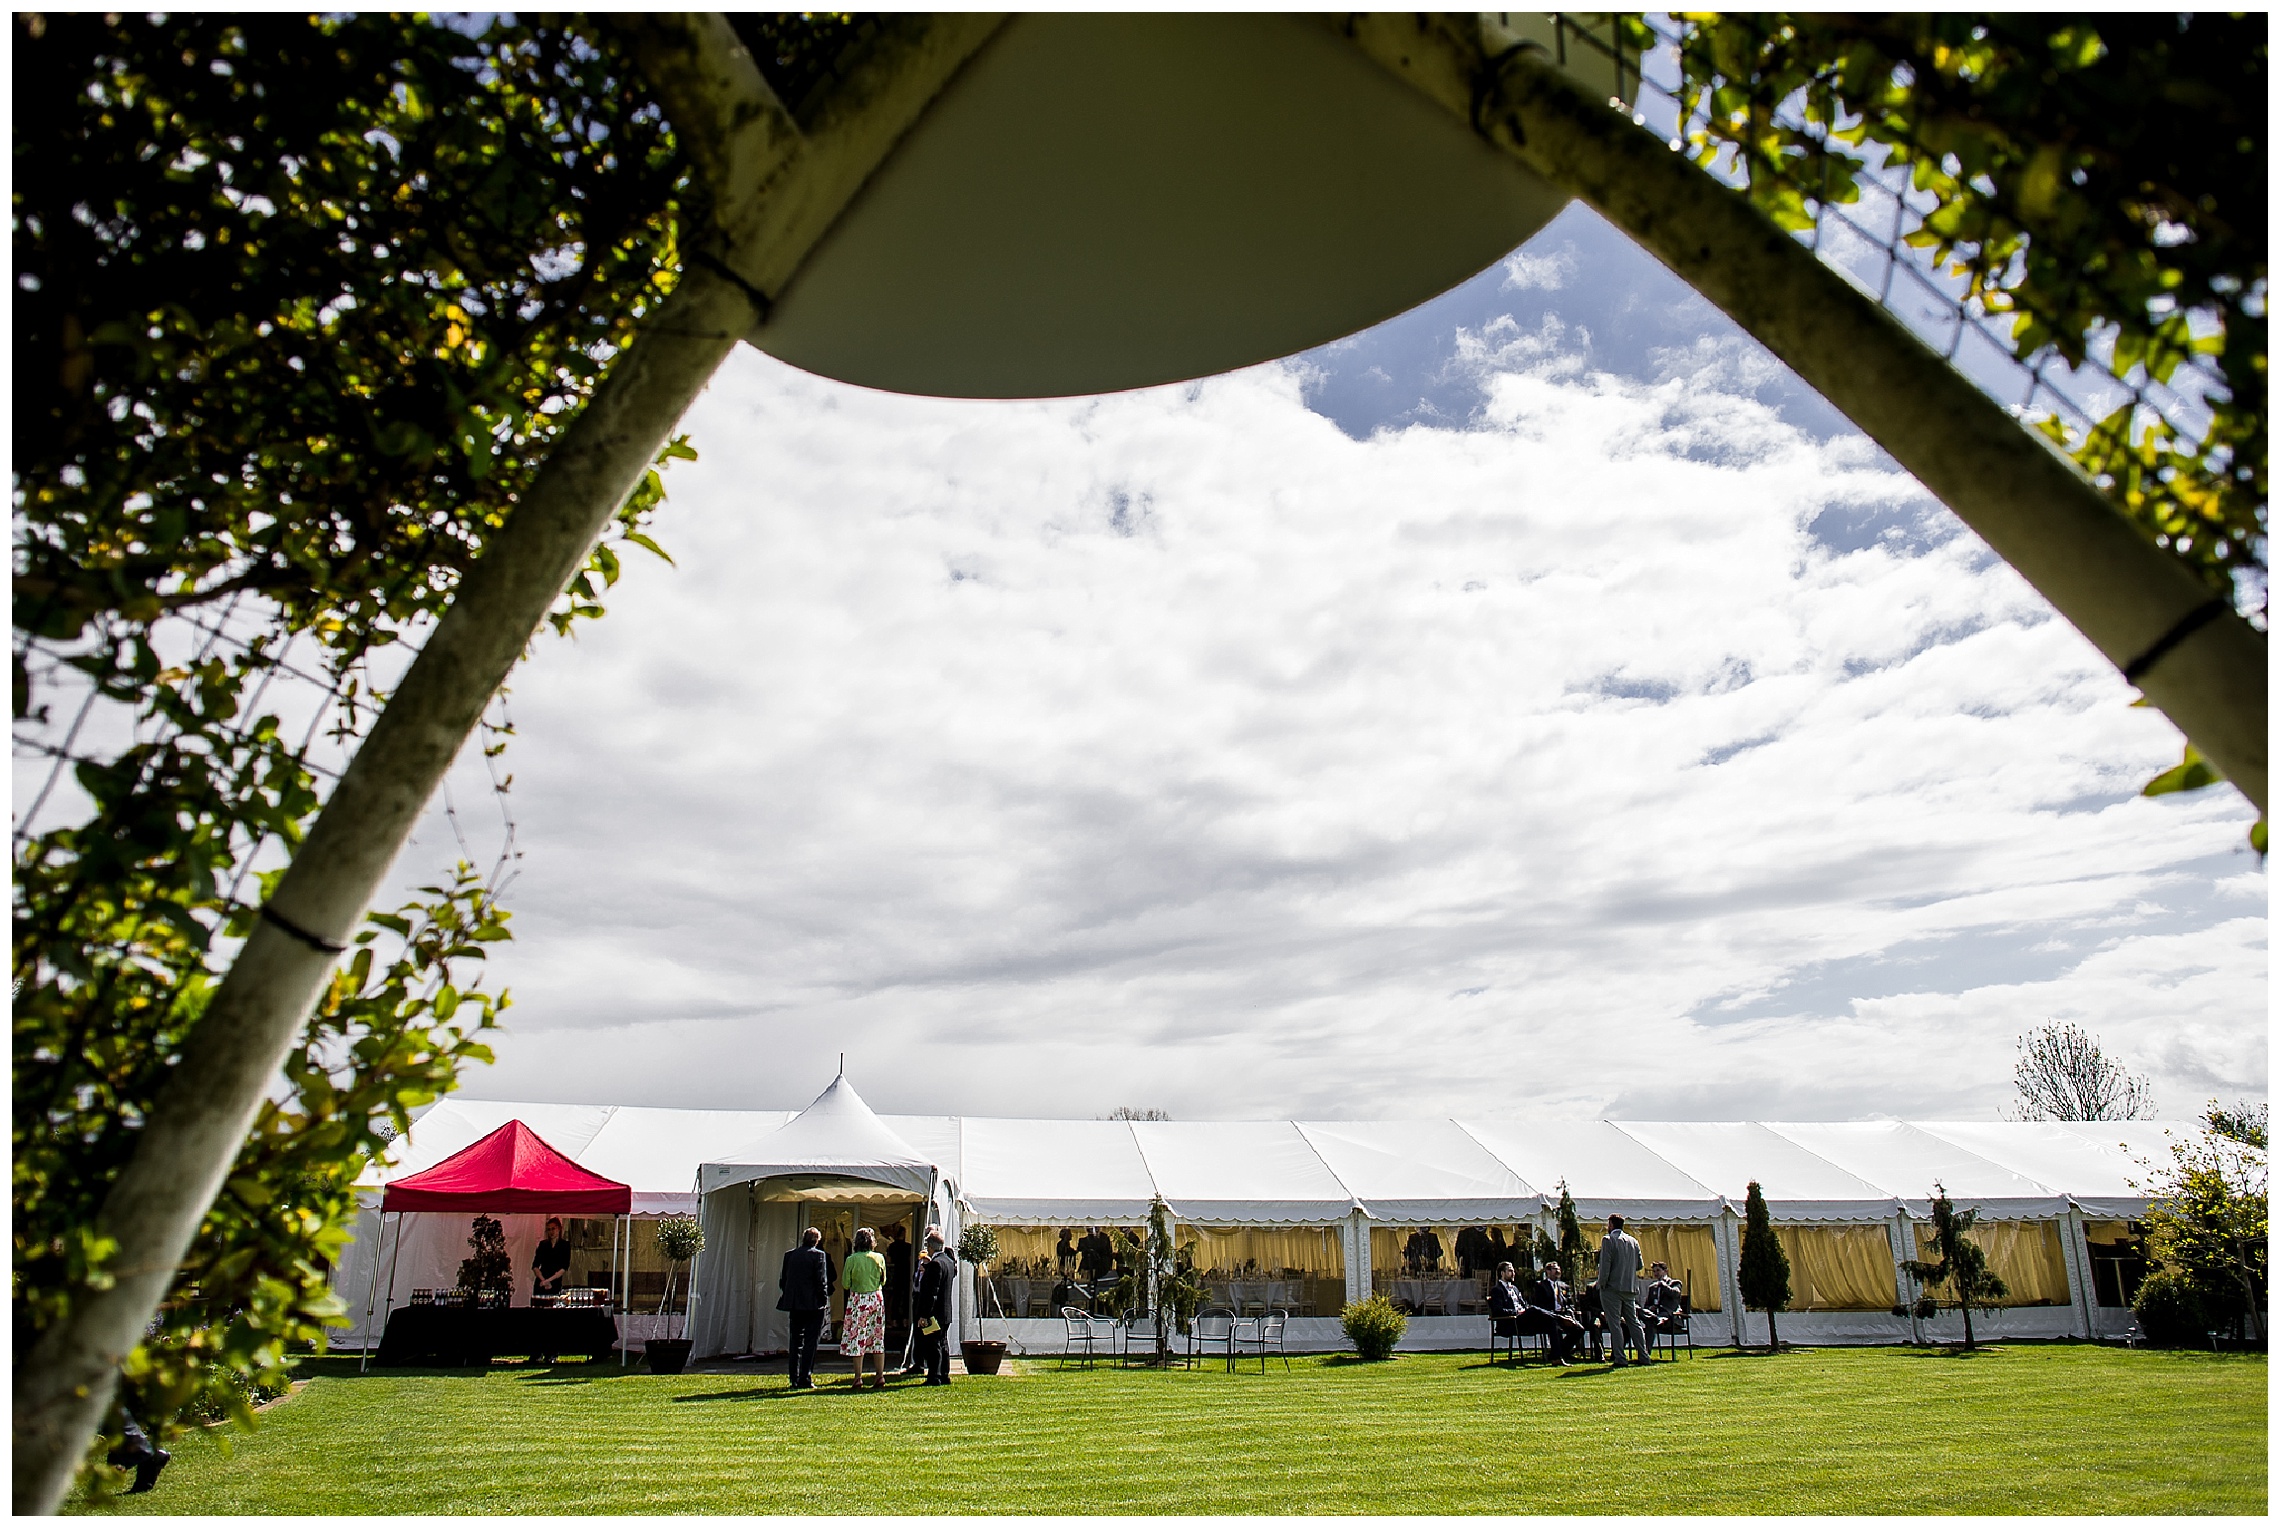 Flaxbourne Gardens Wedding marquee and lawn